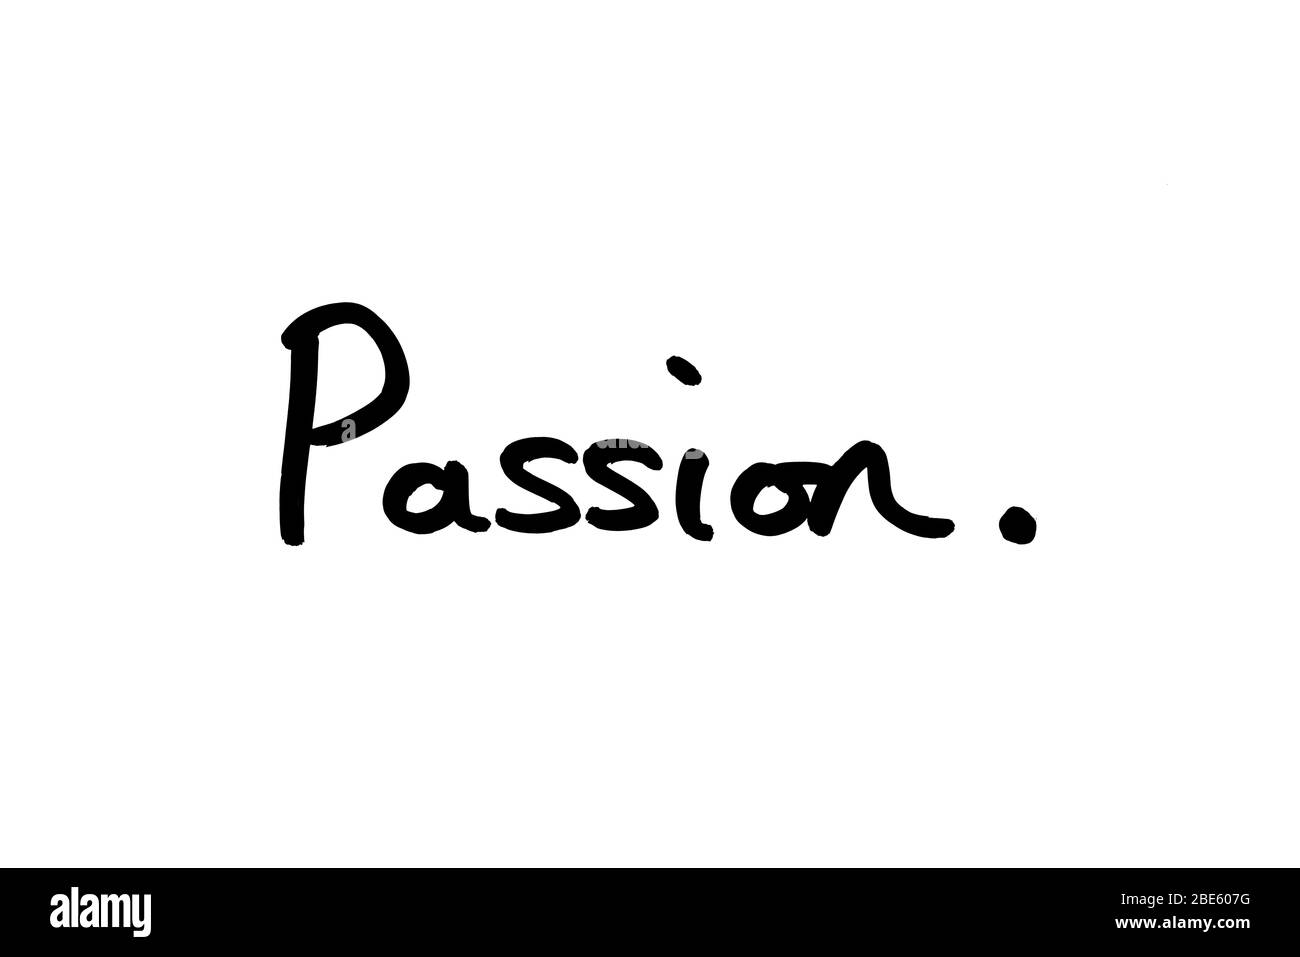 The word Passion handwritten on a white background. Stock Photo